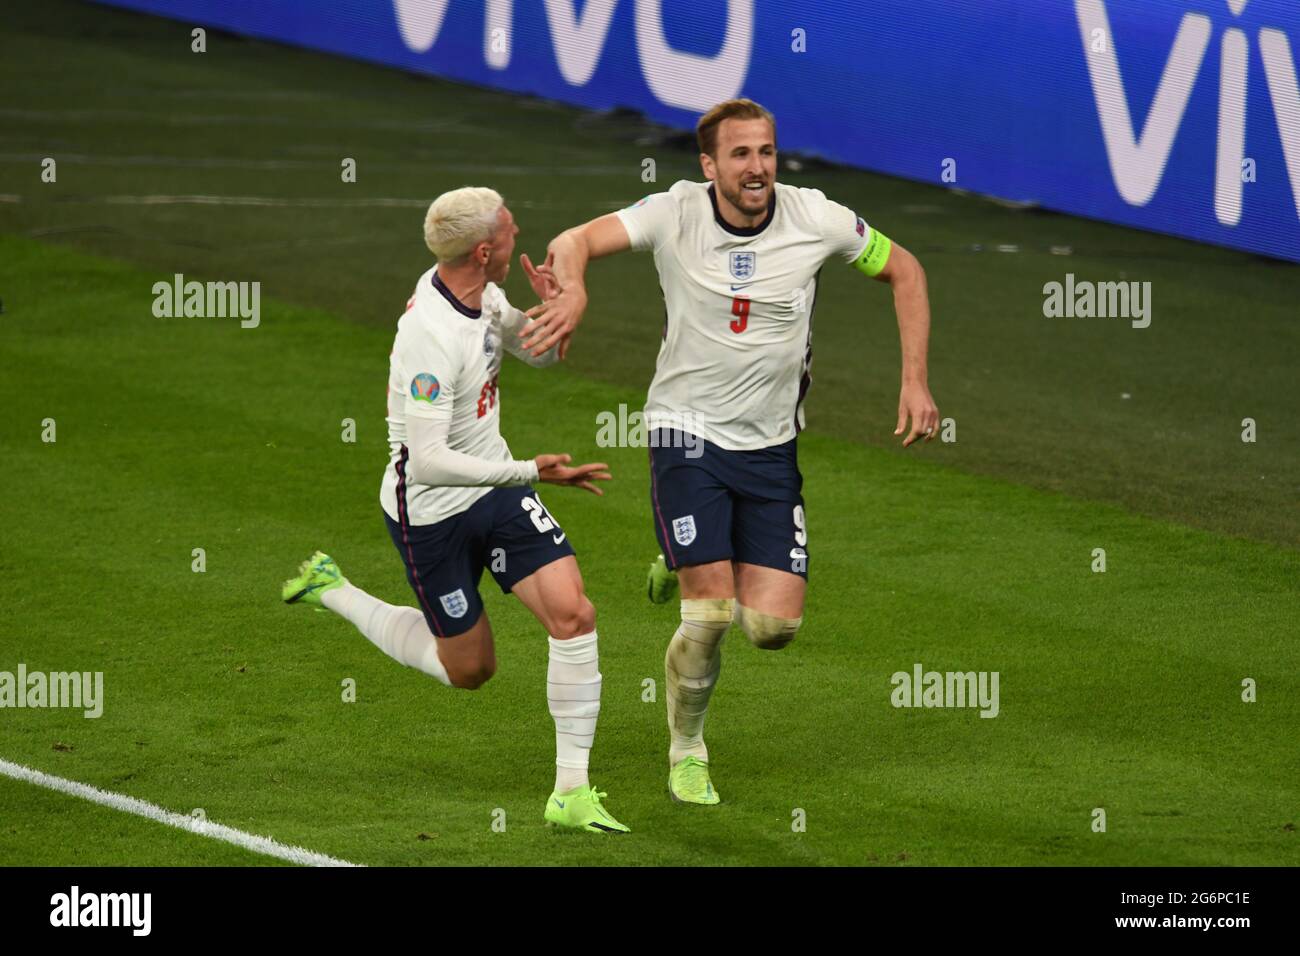 Harry Kane (England)Phil Foden (England) celebrates after scoring his team's second goal during the Uefa 'European Championship 2020 Semifinals match between England 2-1 Denmark at Wembley Stadium on July 07, 2021 in London, England. Credit: Maurizio Borsari/AFLO/Alamy Live News Stock Photo